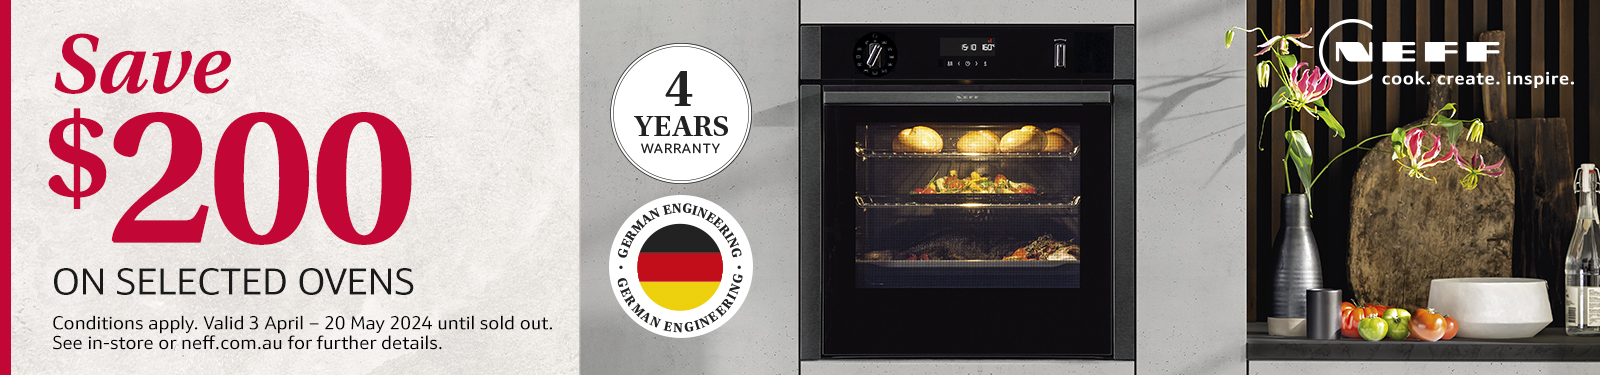 Save Up To $200 On Selected Neff Ovens at Retravision